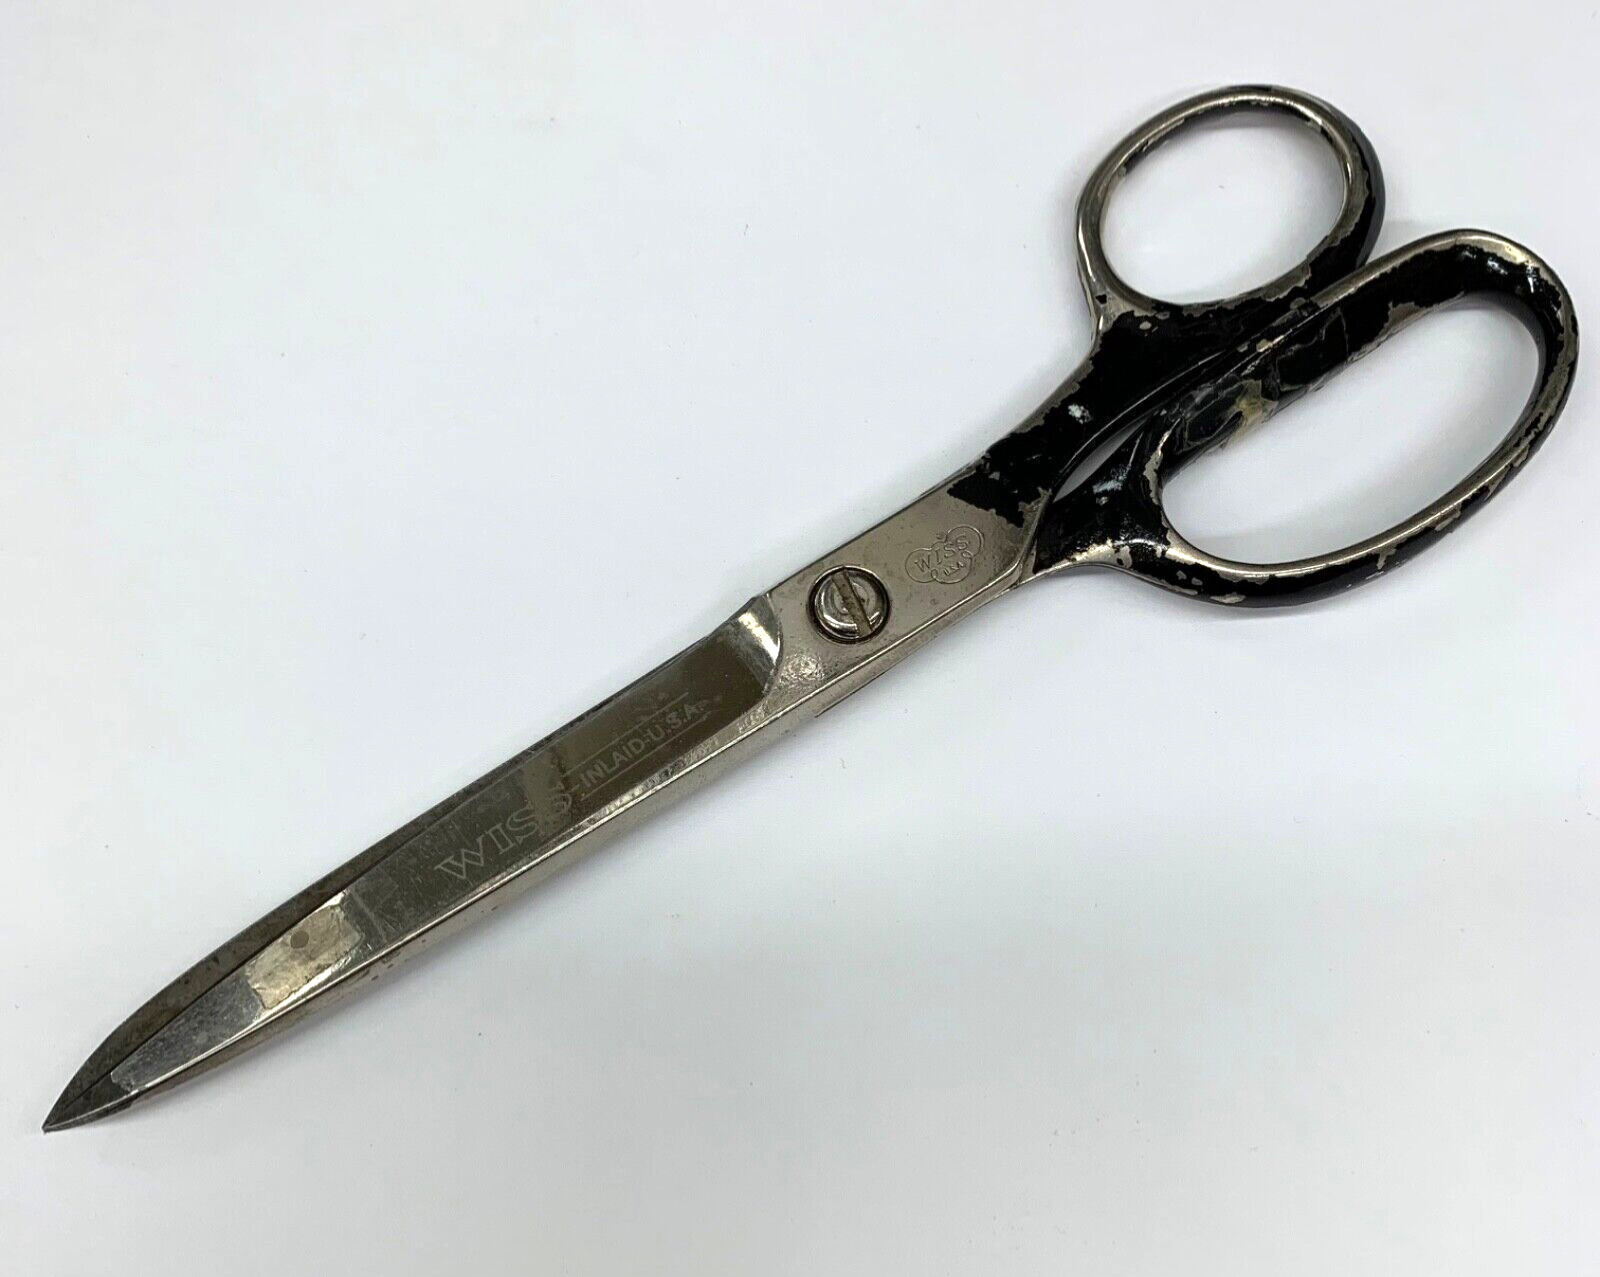 Vintage WISS No 38 Inlaid Steel Forged Tailor\'s Shears Scissors